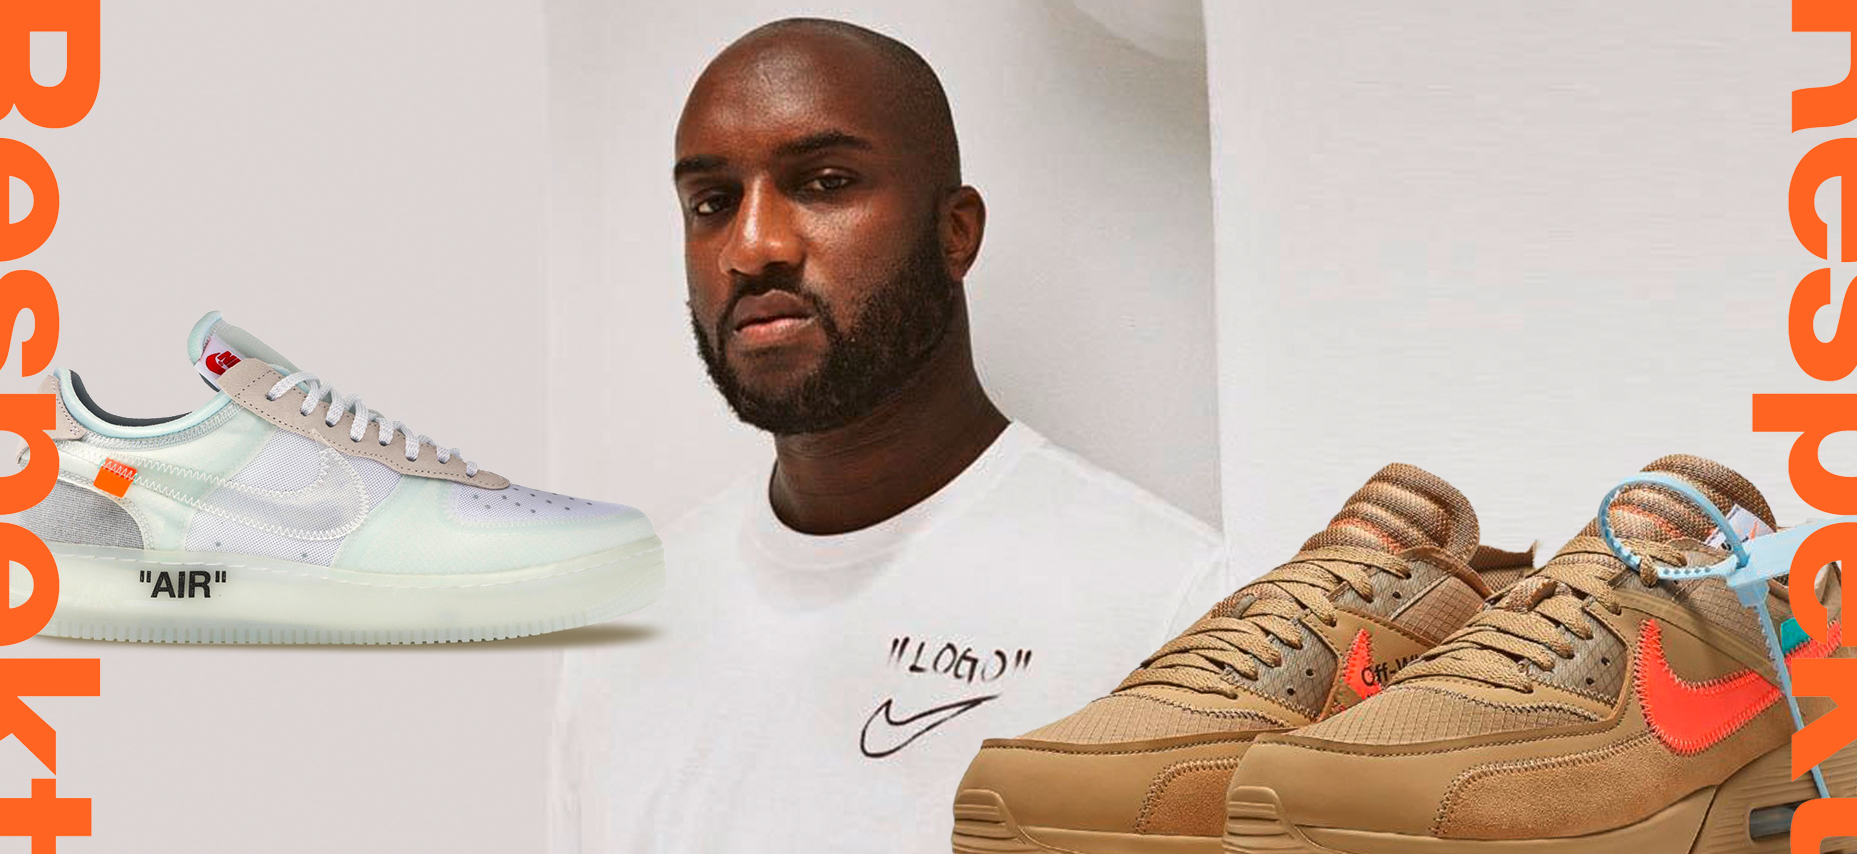 Virgil Abloh - From nowhere to Nike and LV - EMPIRE